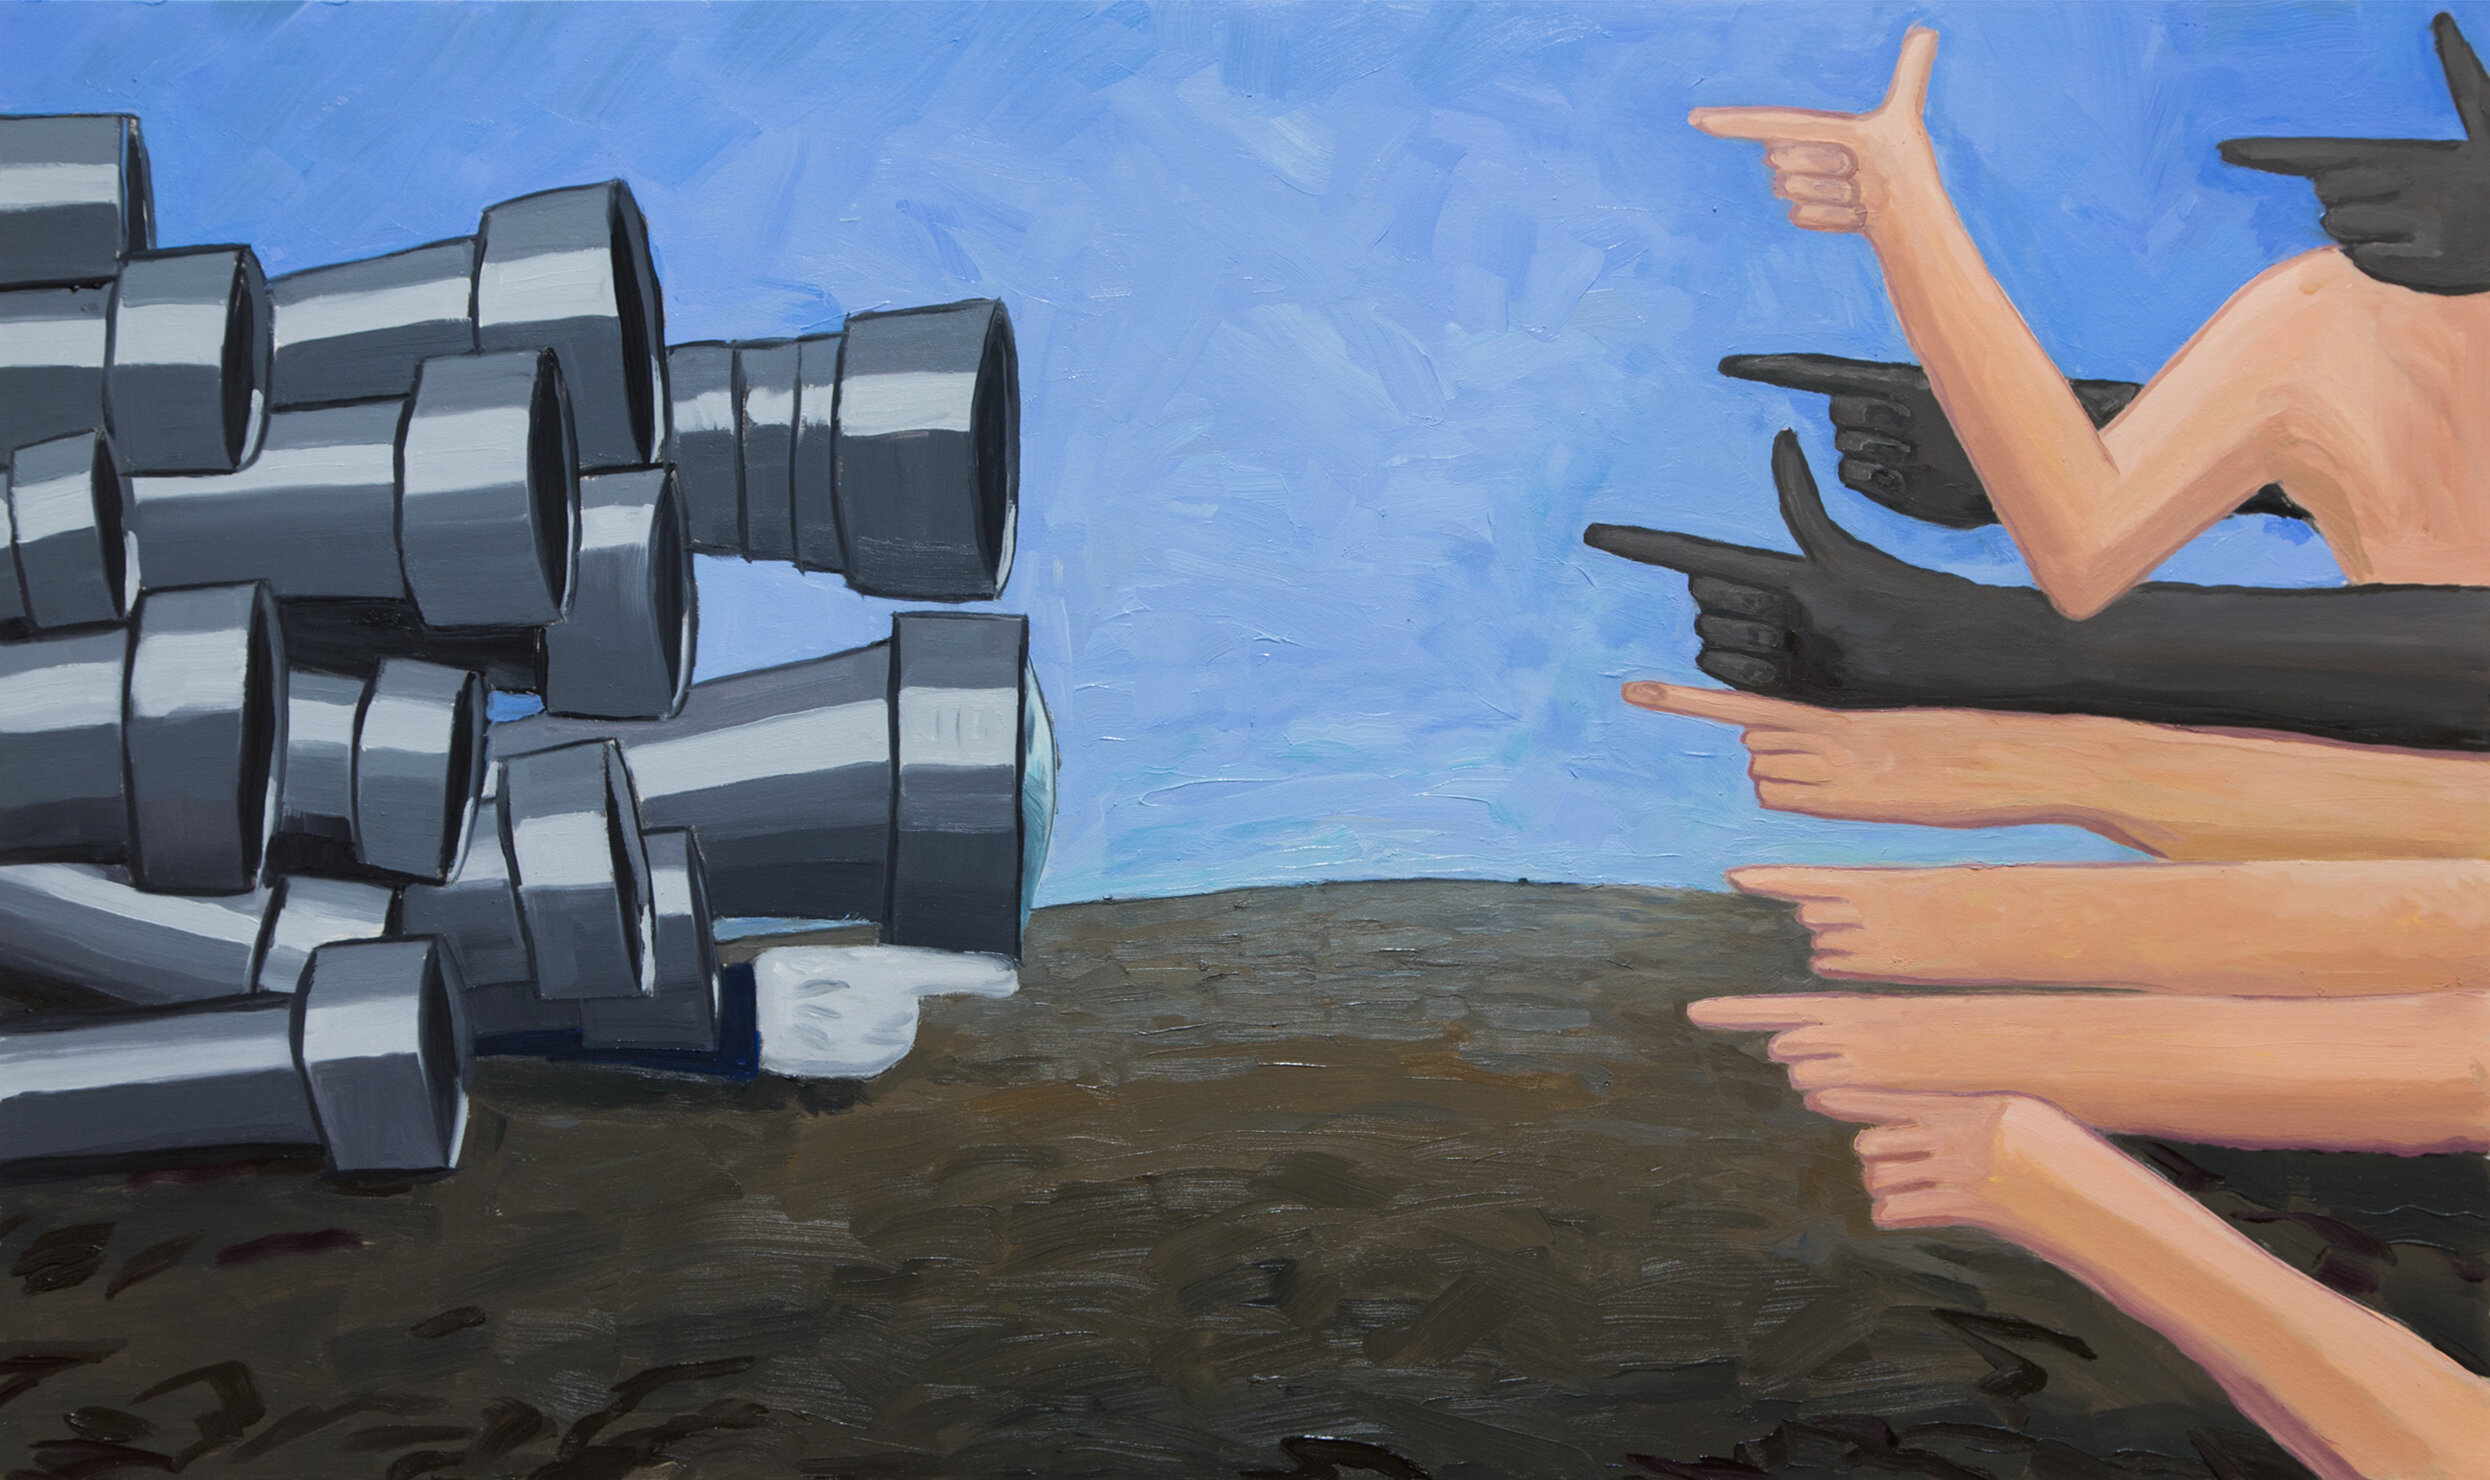  Pointing Fingers, 2018 Oil on canvas, 24 x 36 inches A phalanx of camera lens, point at hands pointing back. Observation meets accusation. $1400 